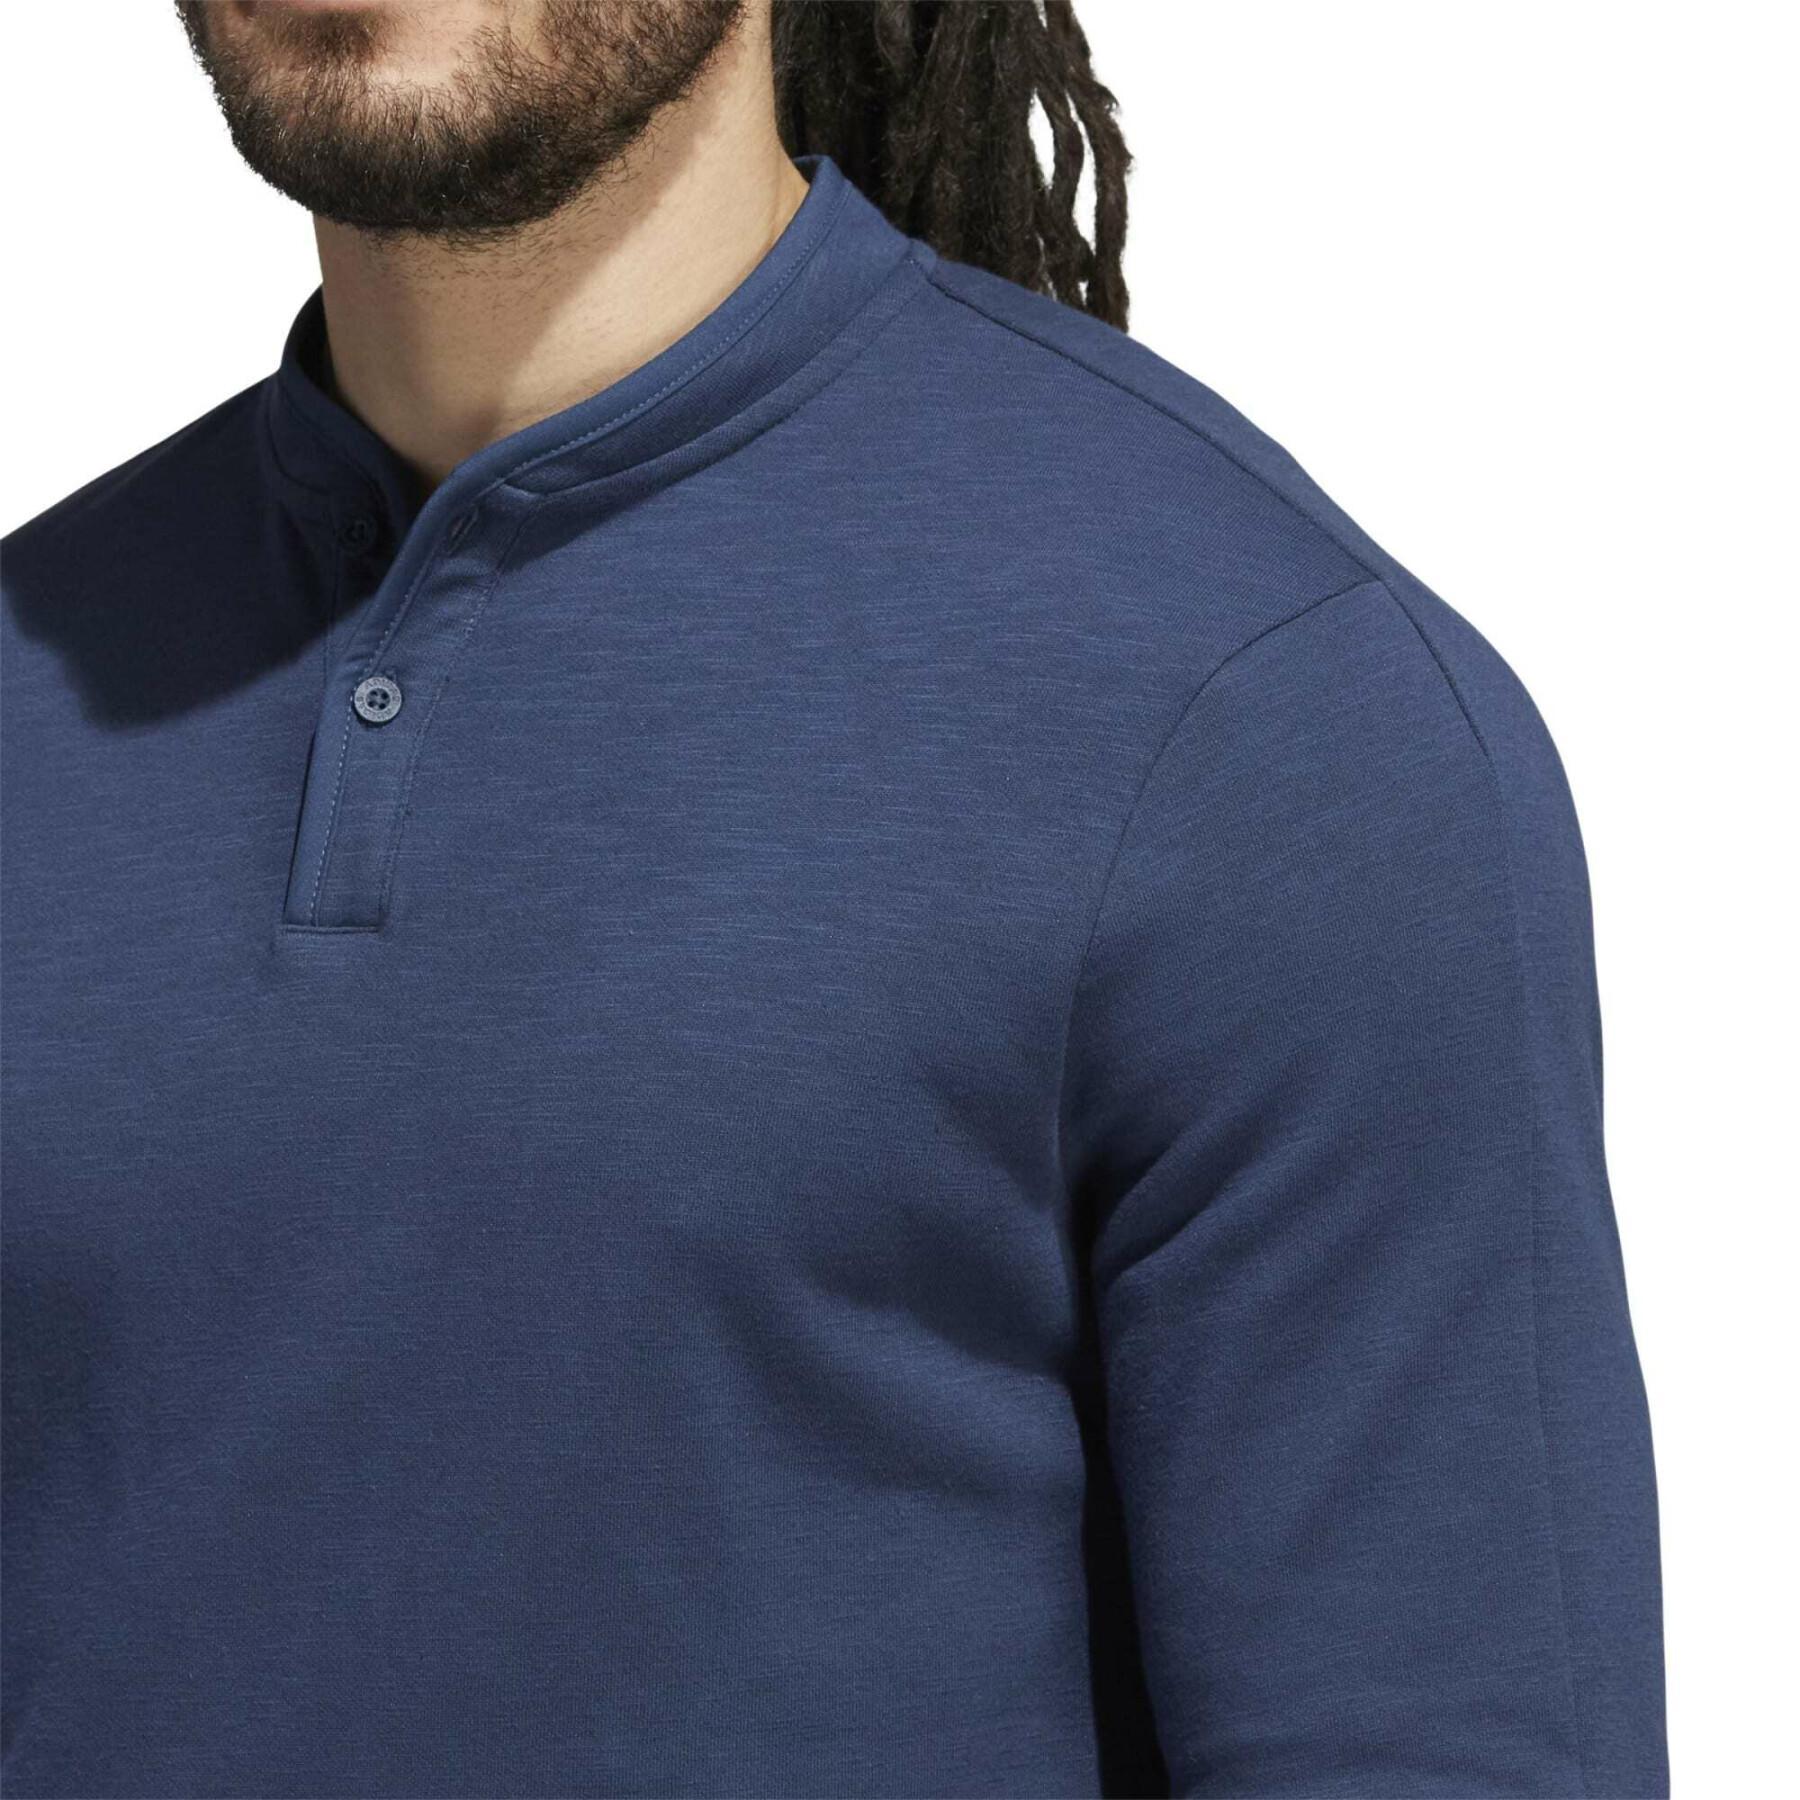 Langärmeliges Polo-Shirt adidas Go-To Henley